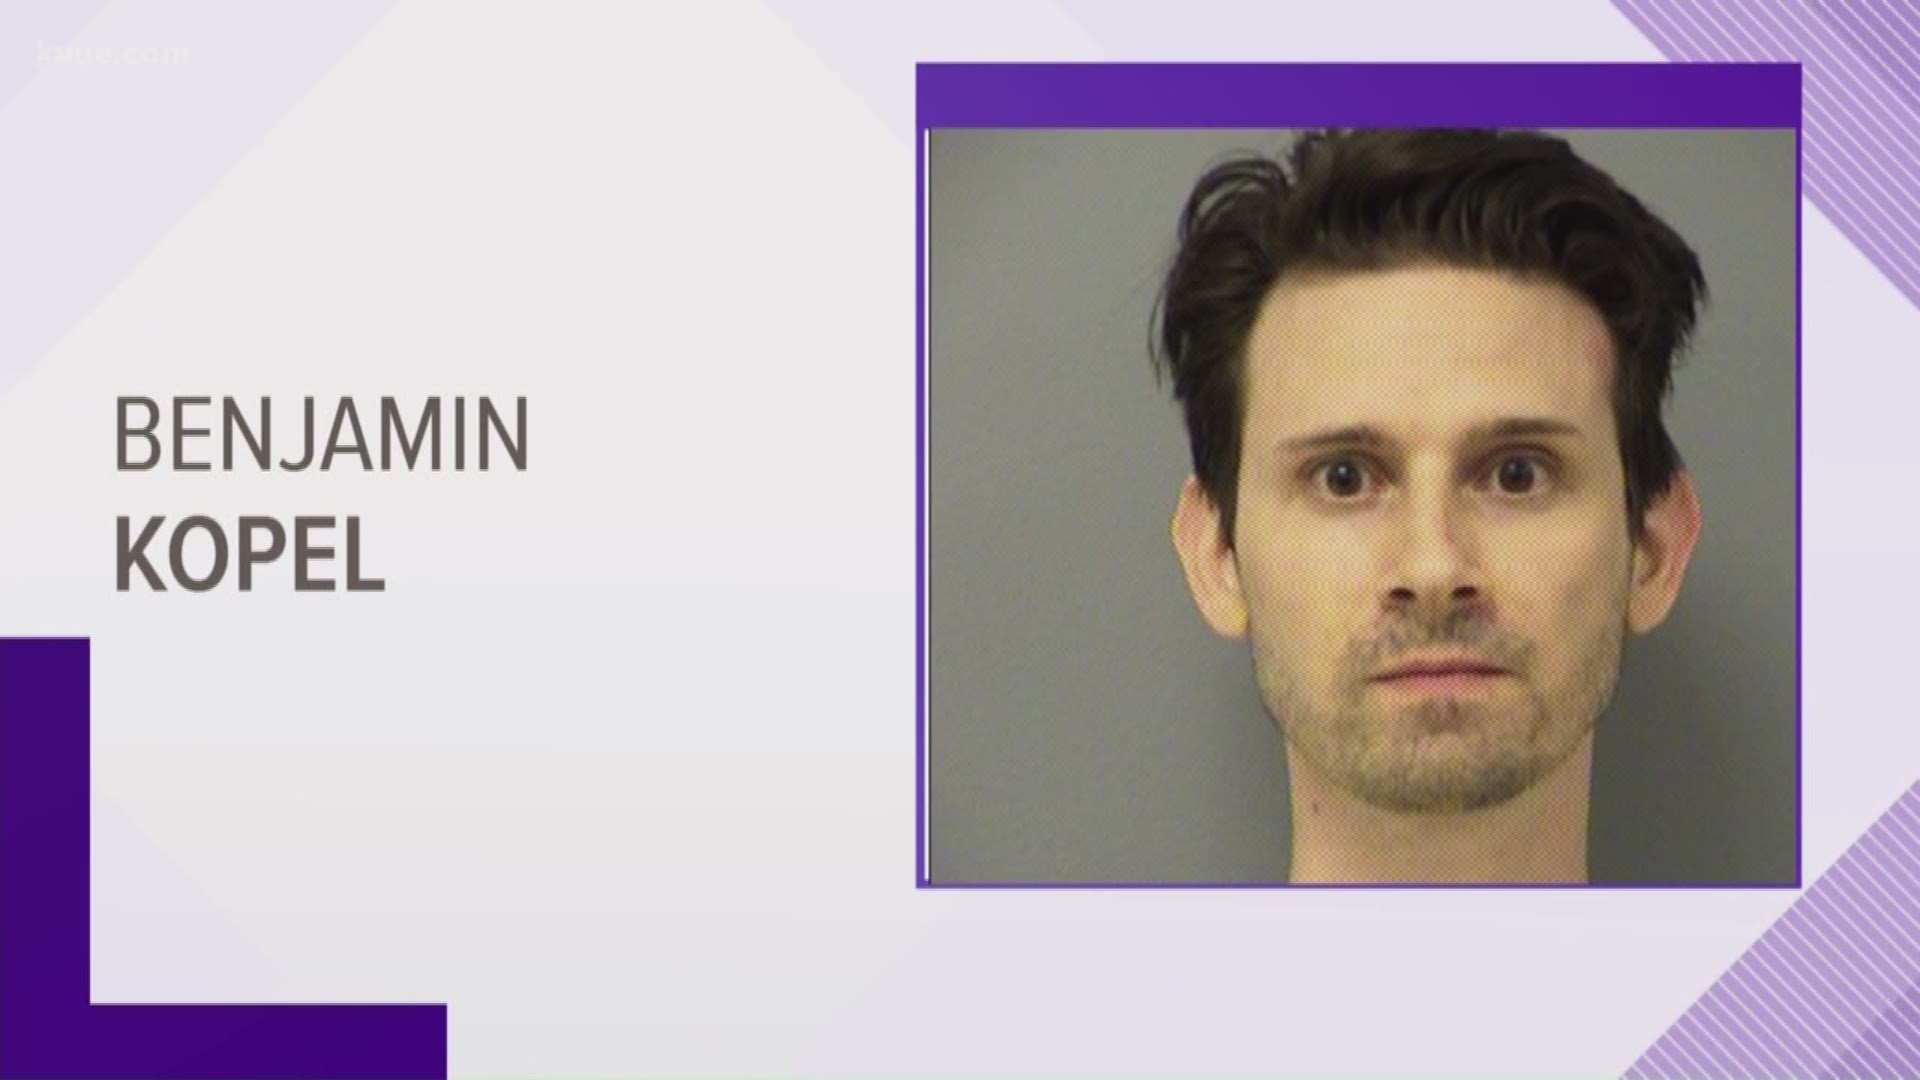 An Austin teacher is facing charges after allegedly sending inappropriate messages to a student.